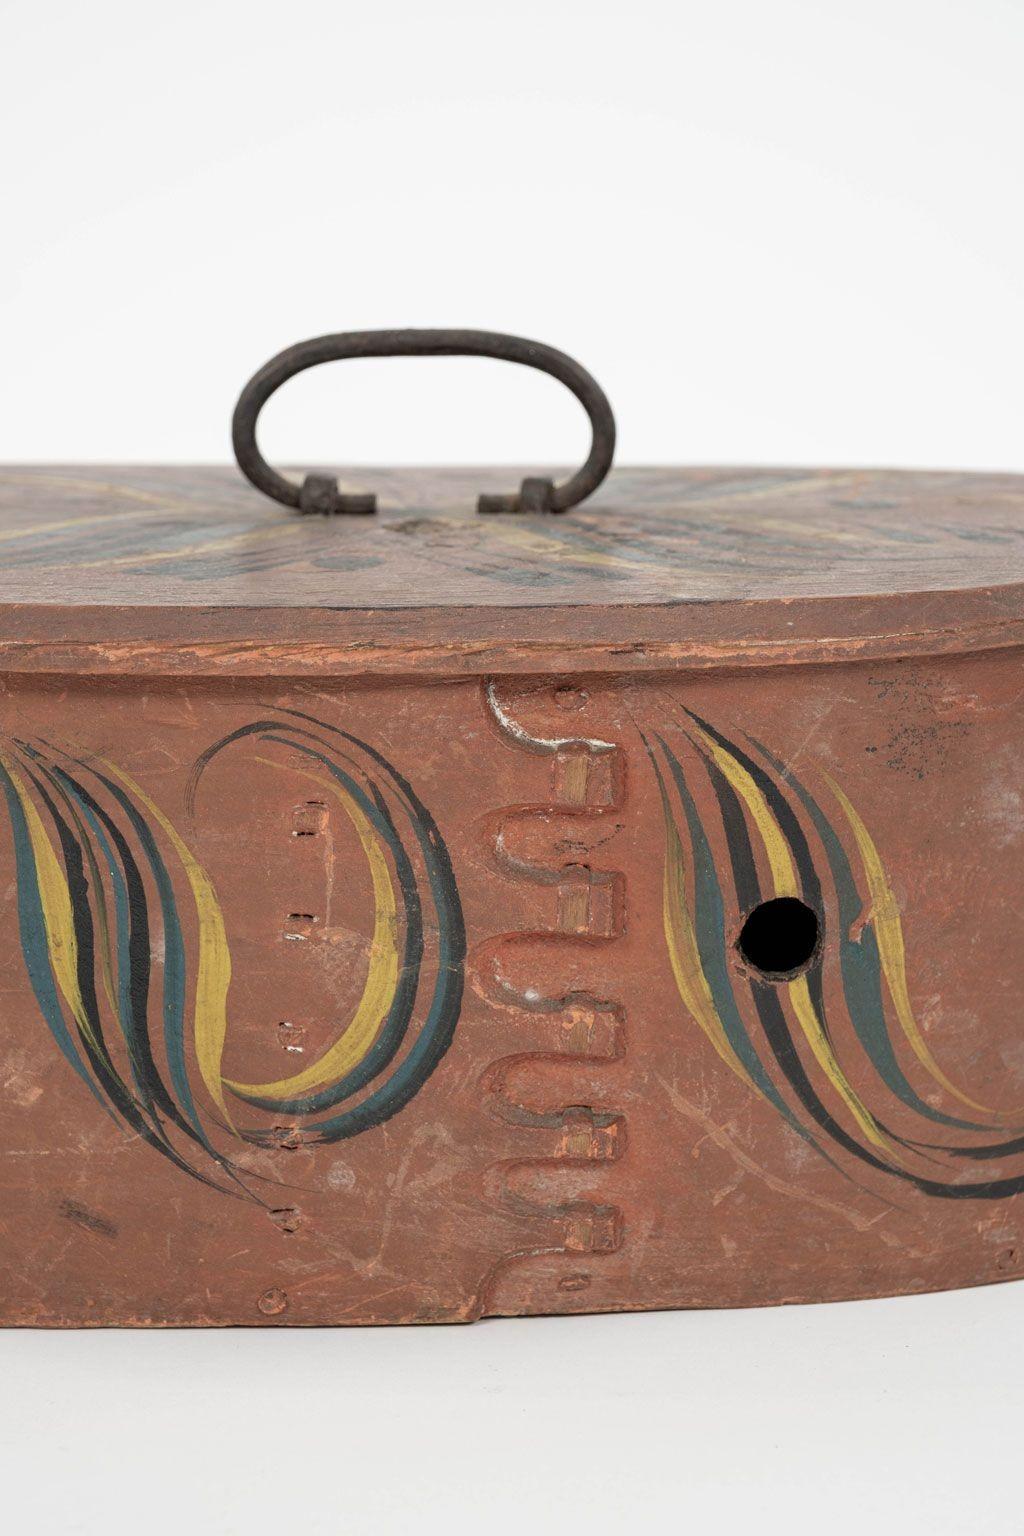 Scandinavian tine, or svepask, painted bentwood oval-shape box circa late 19th century, probably from the Sogn og Fjordane region. Box is created from thin layers of steam-bent wood laced together with a piece of birch root. Box opens when the two